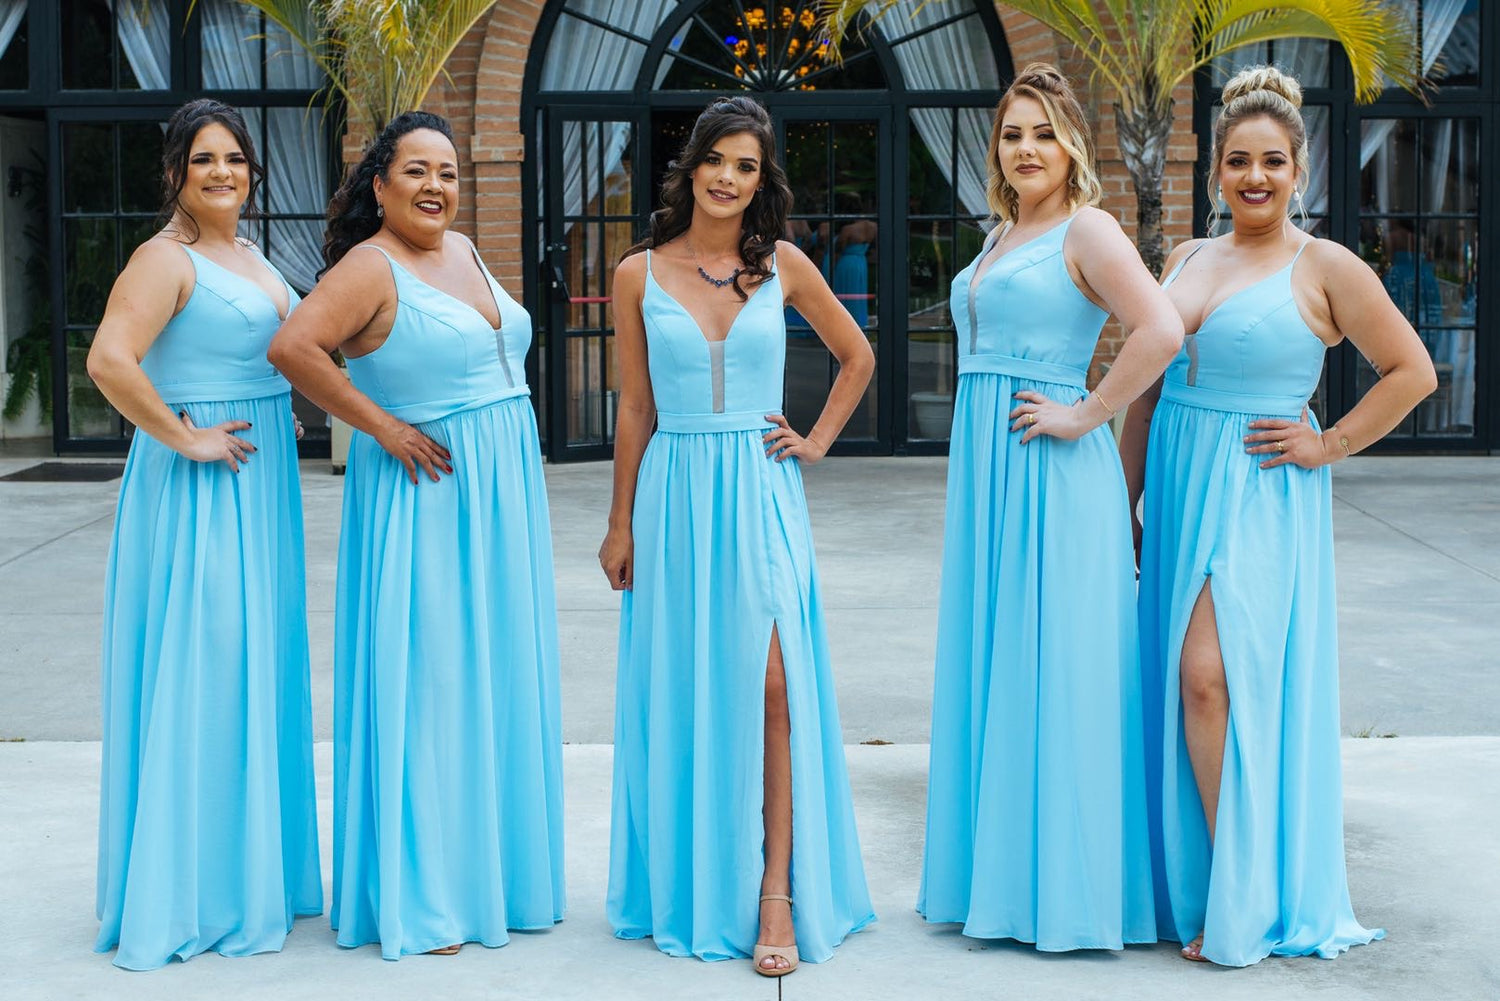 4 Things to do for a Destination Wedding as a Bridesmaid